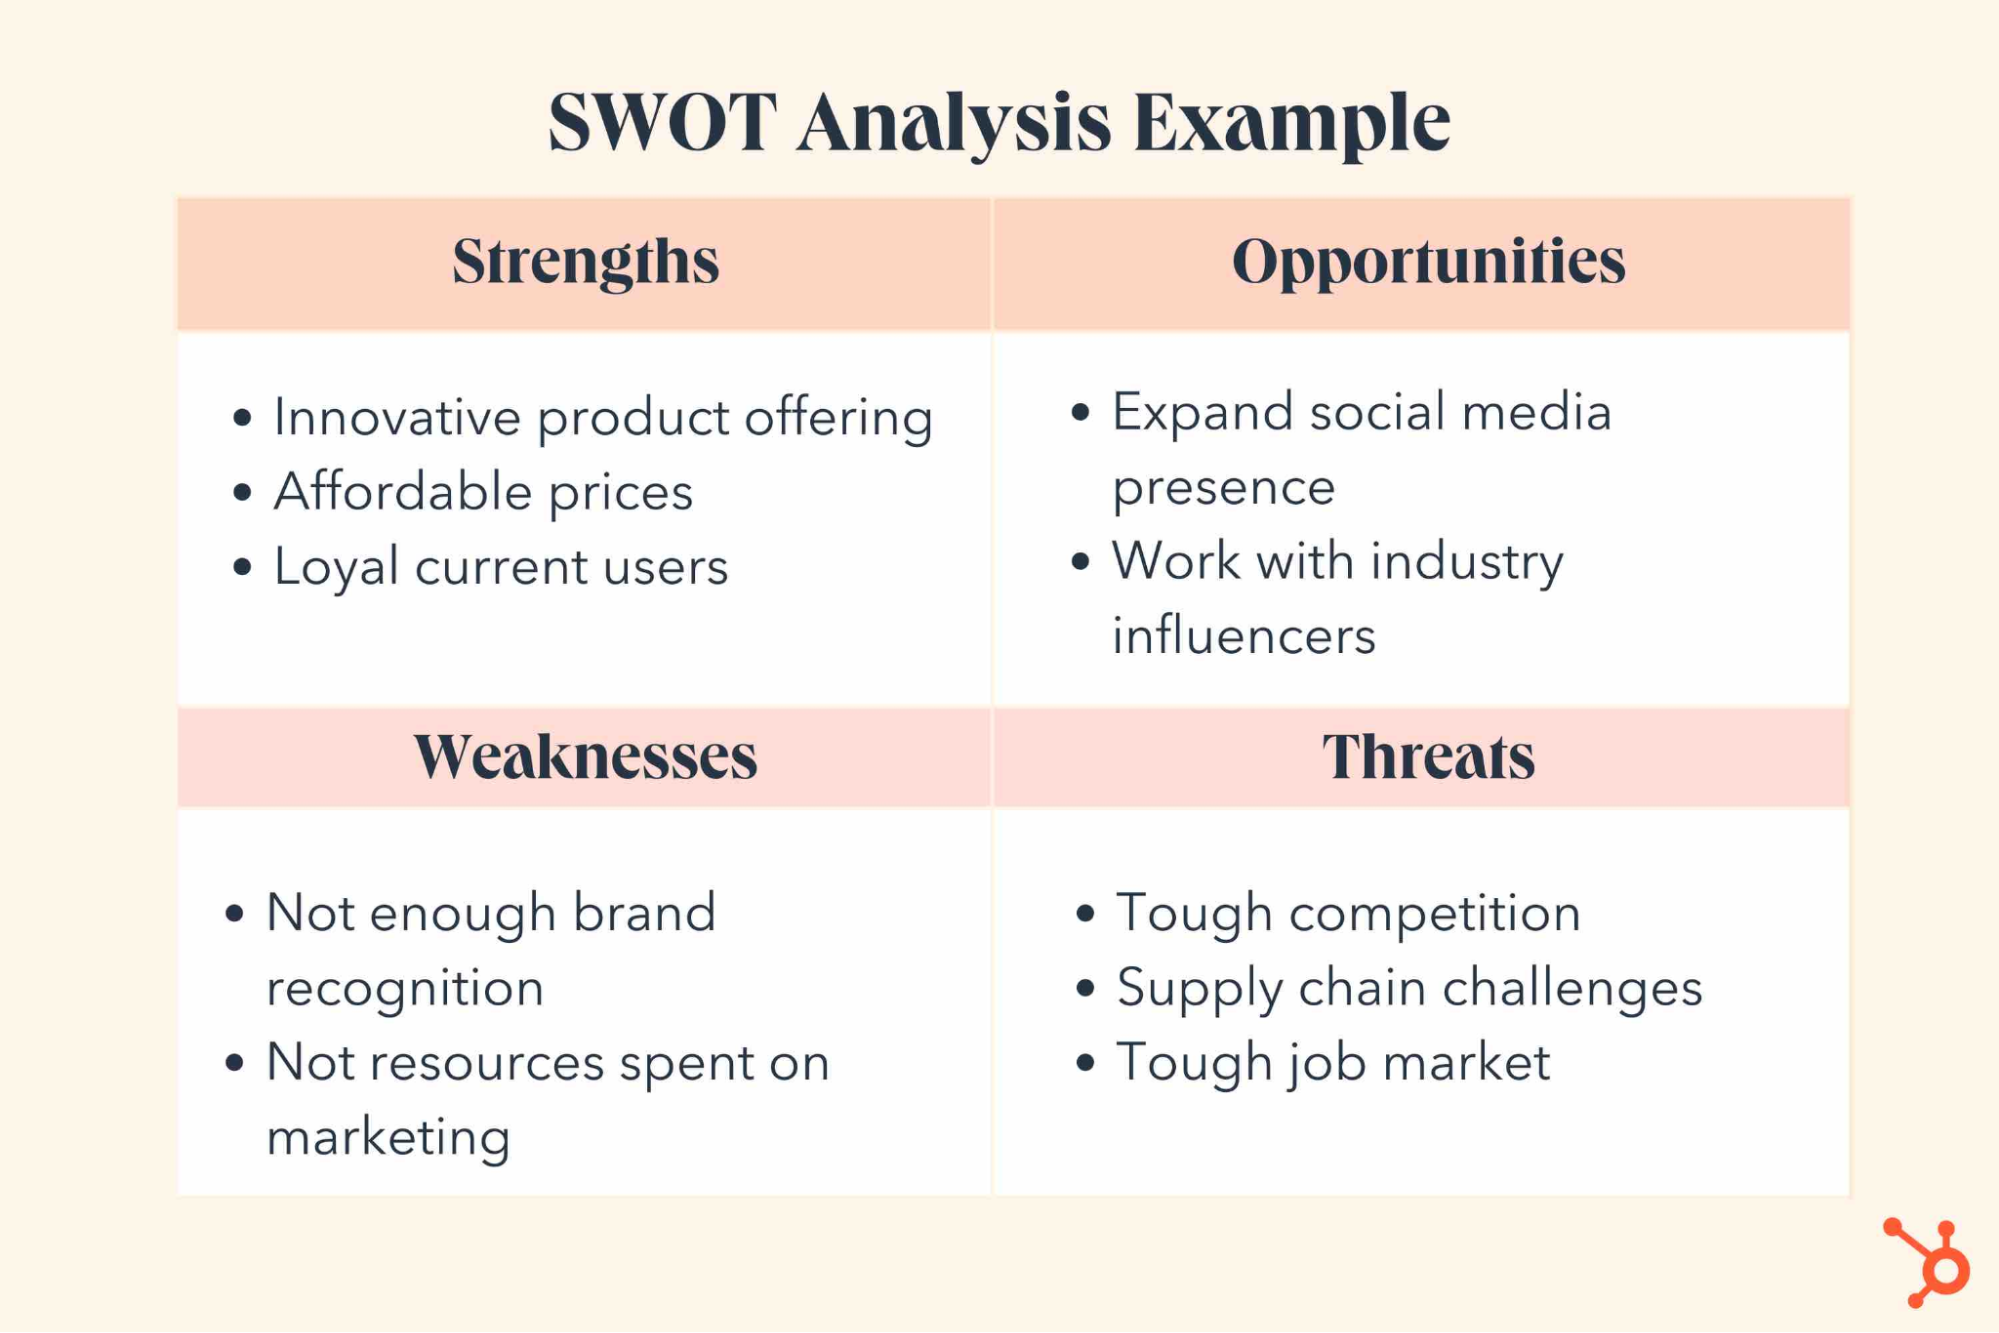 SWOT Analysis Example Competitive Landscape Analysis